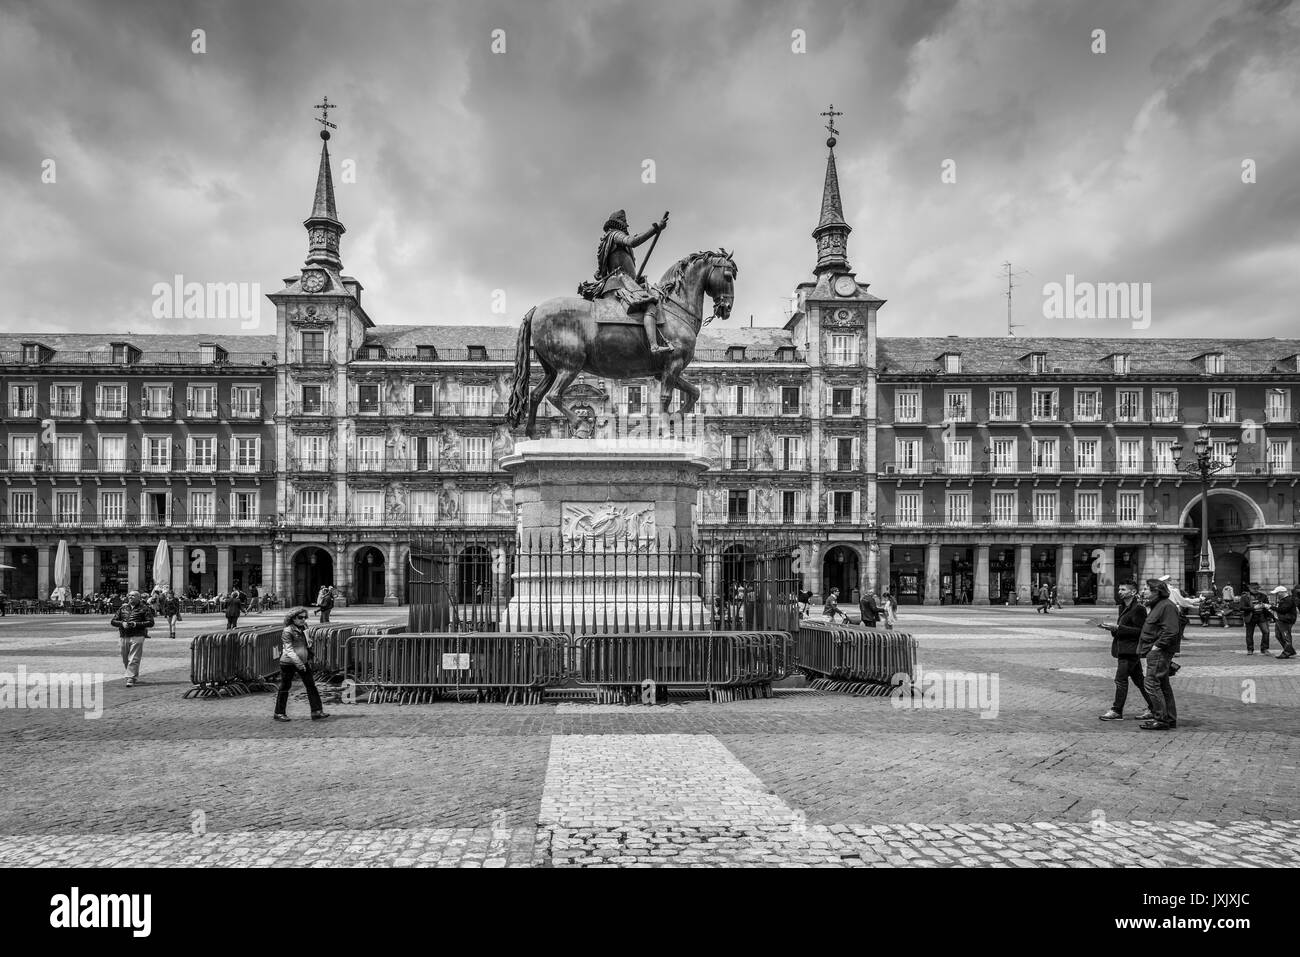 Madrid, Spain - May 22, 2014: Plaza Mayor with statue of King Philips III in Madrid, Spain. Black and white retro style. Architecture and landmark of  Stock Photo